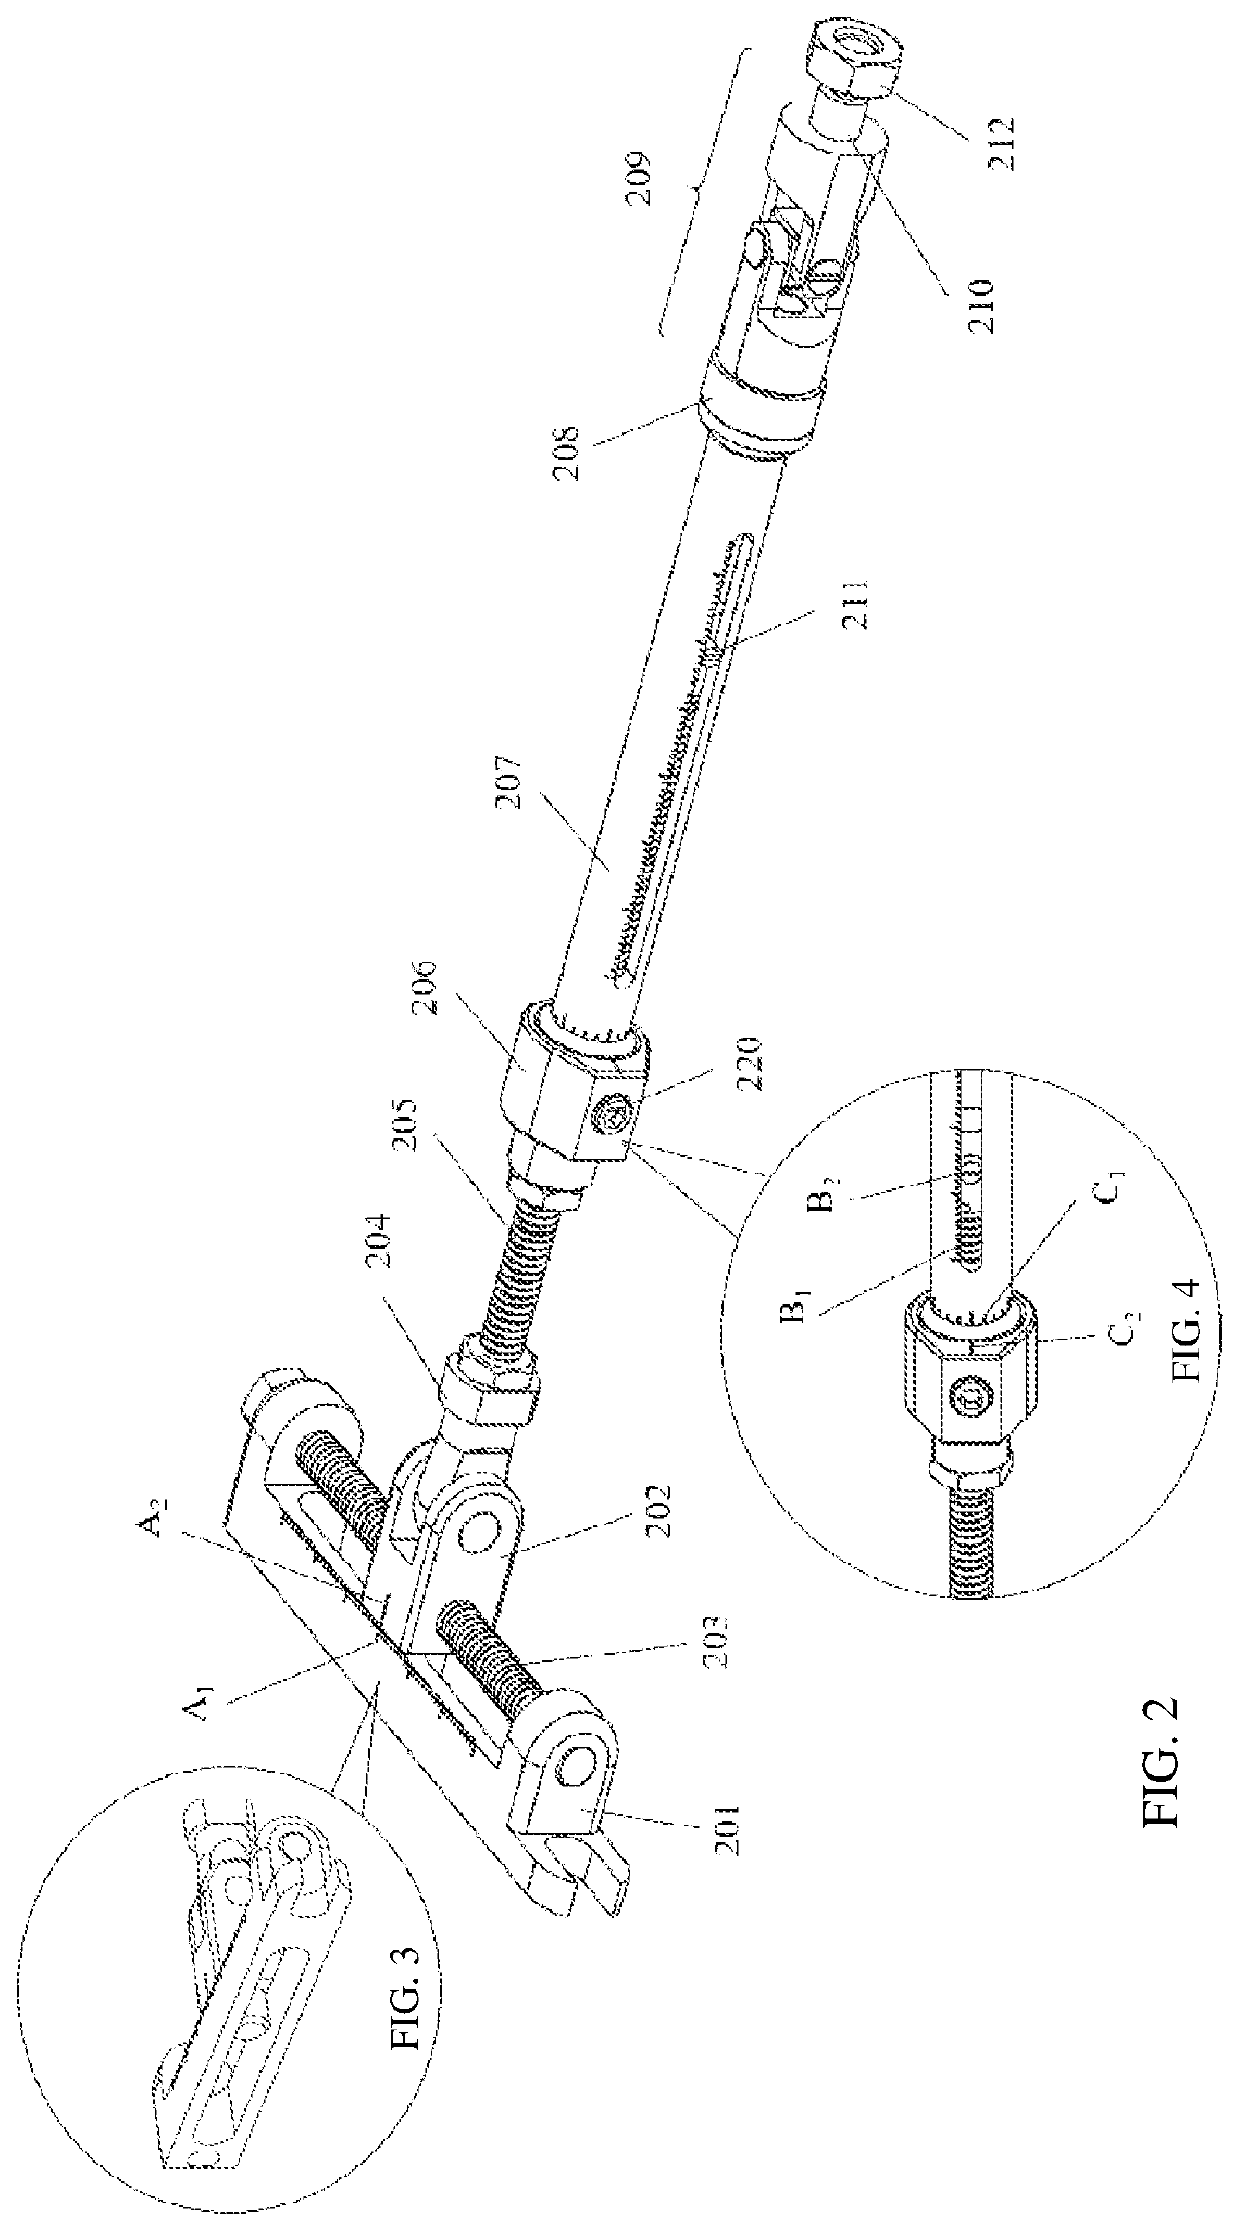 Freely-connectable three-strut parallel orthopedic external fixator